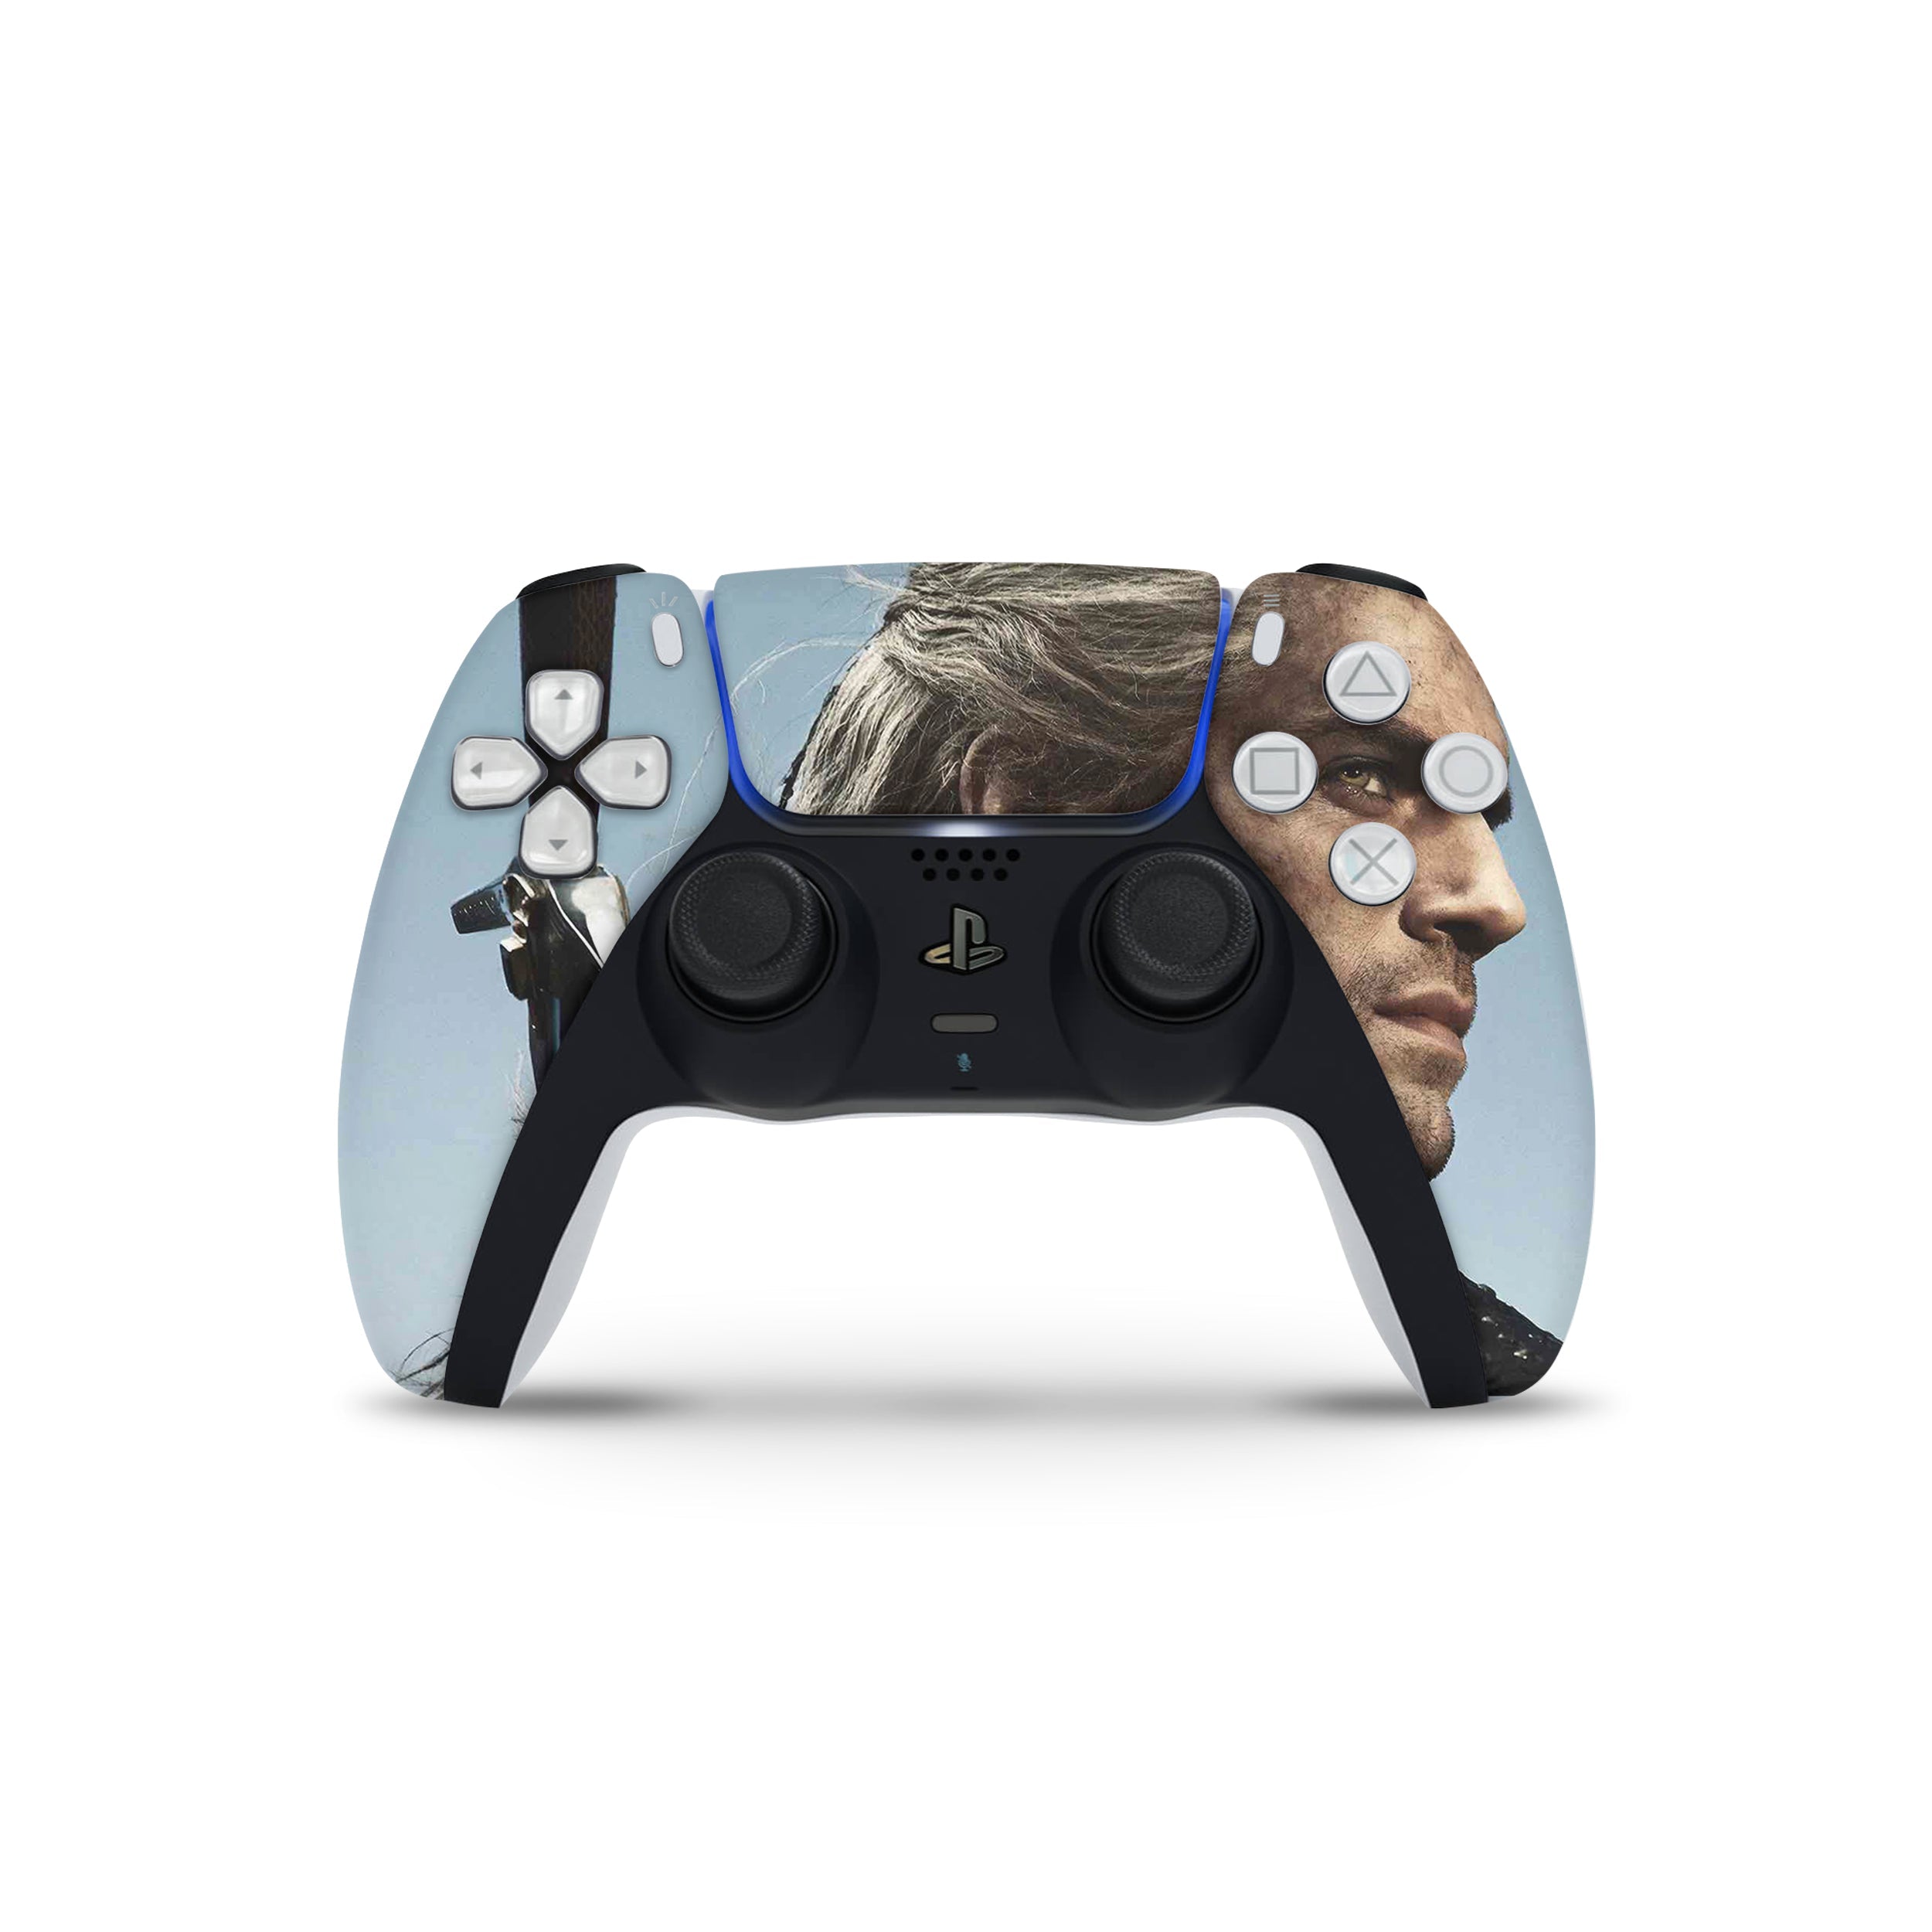 A video game skin featuring a The Witcher design for the PS5 DualSense Controller.